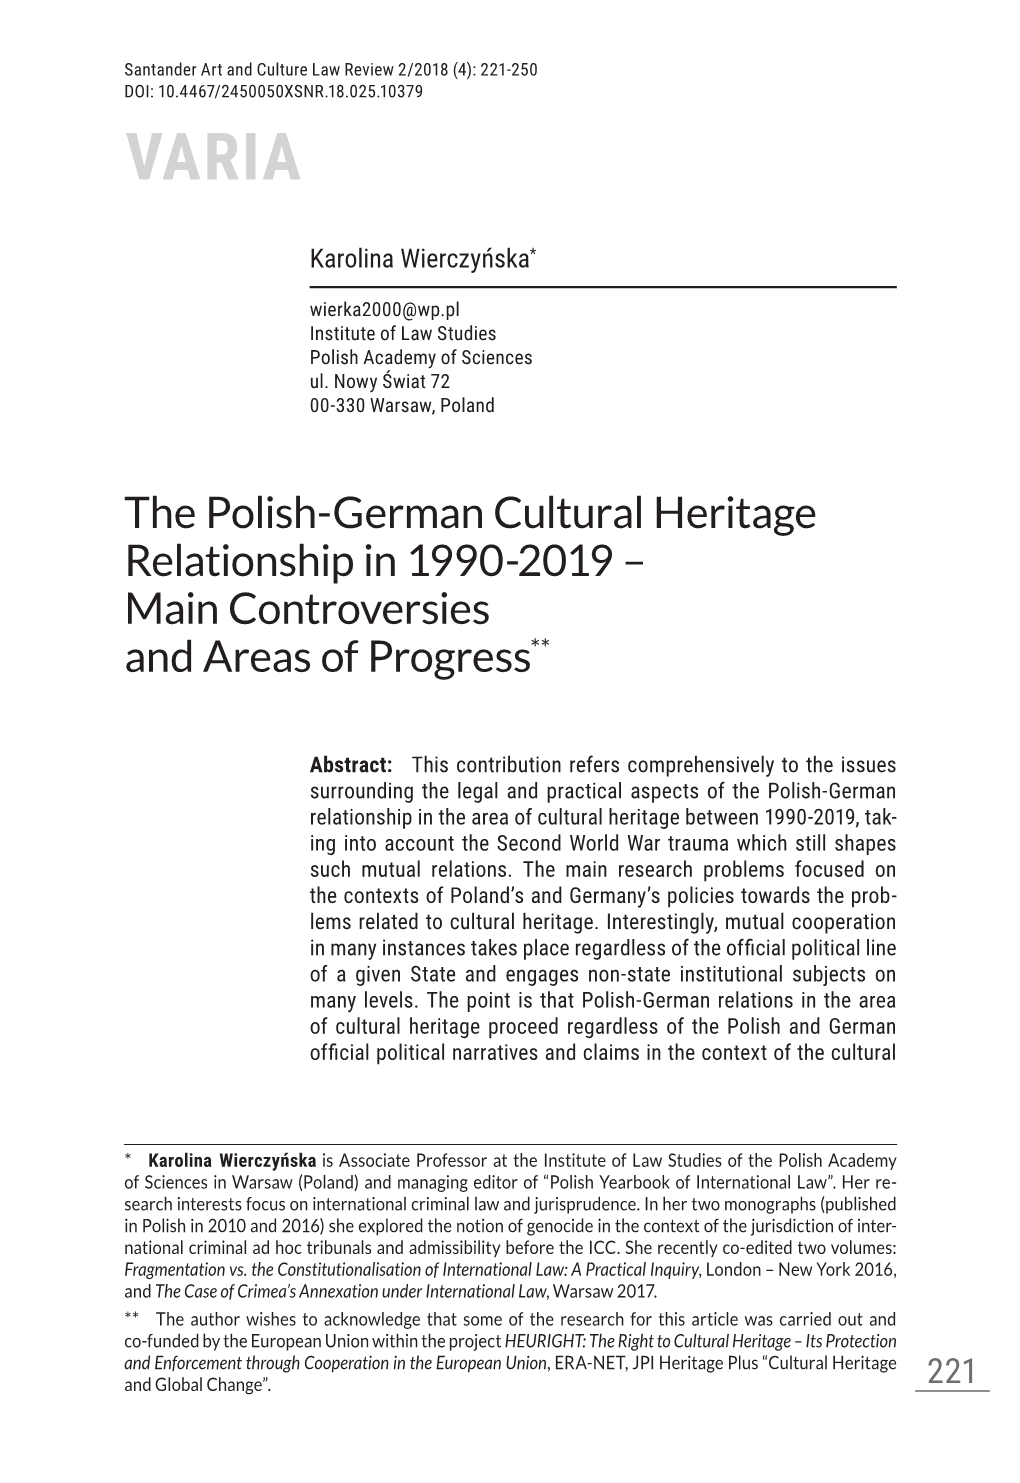 The Polish-German Cultural Heritage Relationship in 1990-2019 – Main Controversies and Areas of Progress**